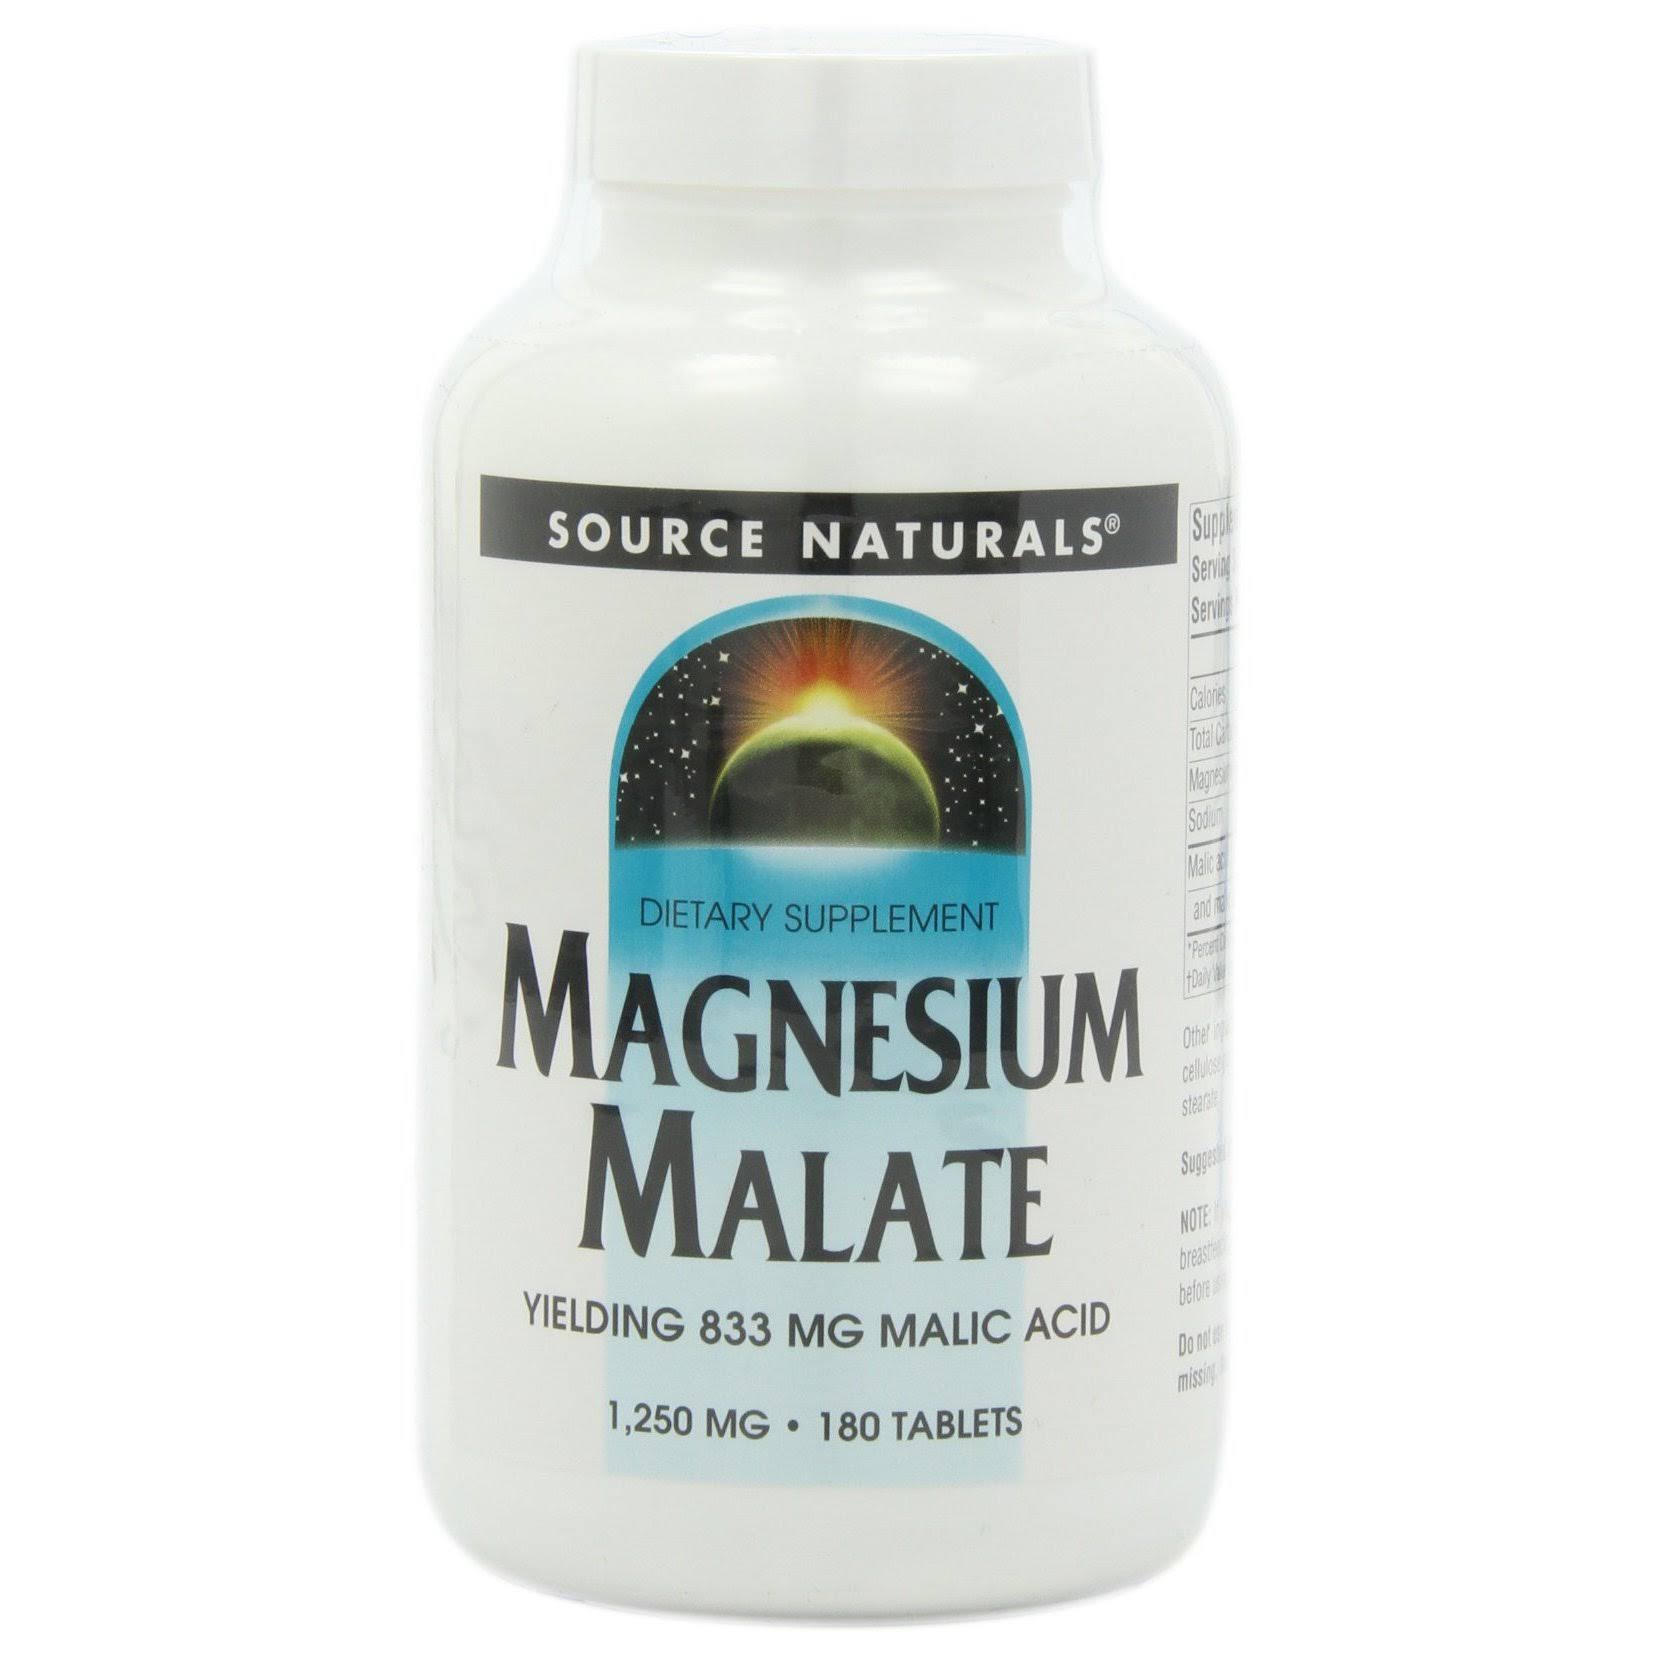 Source Naturals Magnesium Malate - 1250mg, 180 Tablets